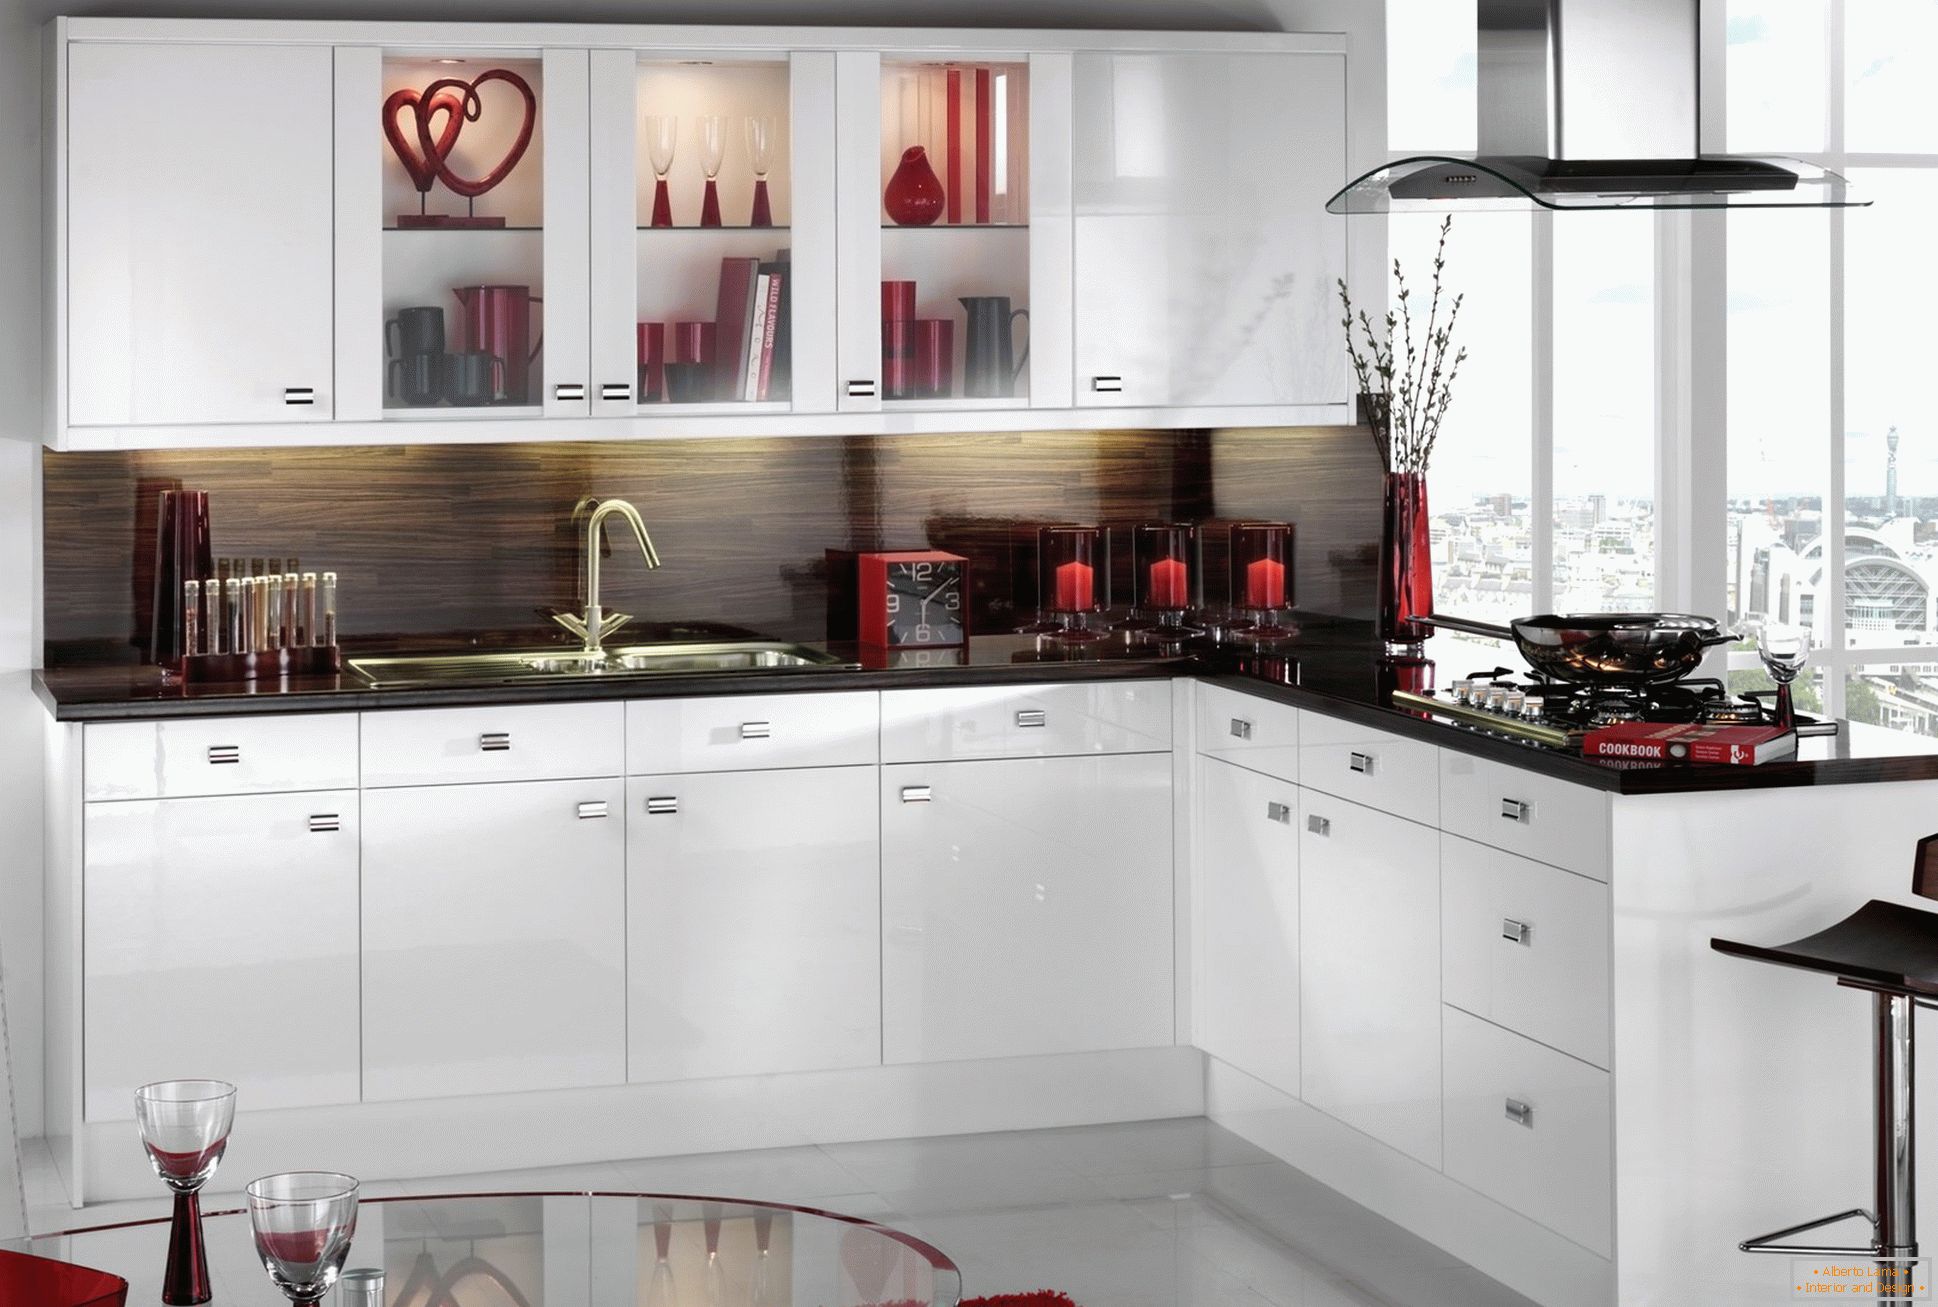 Black and red in the design of the white kitchen